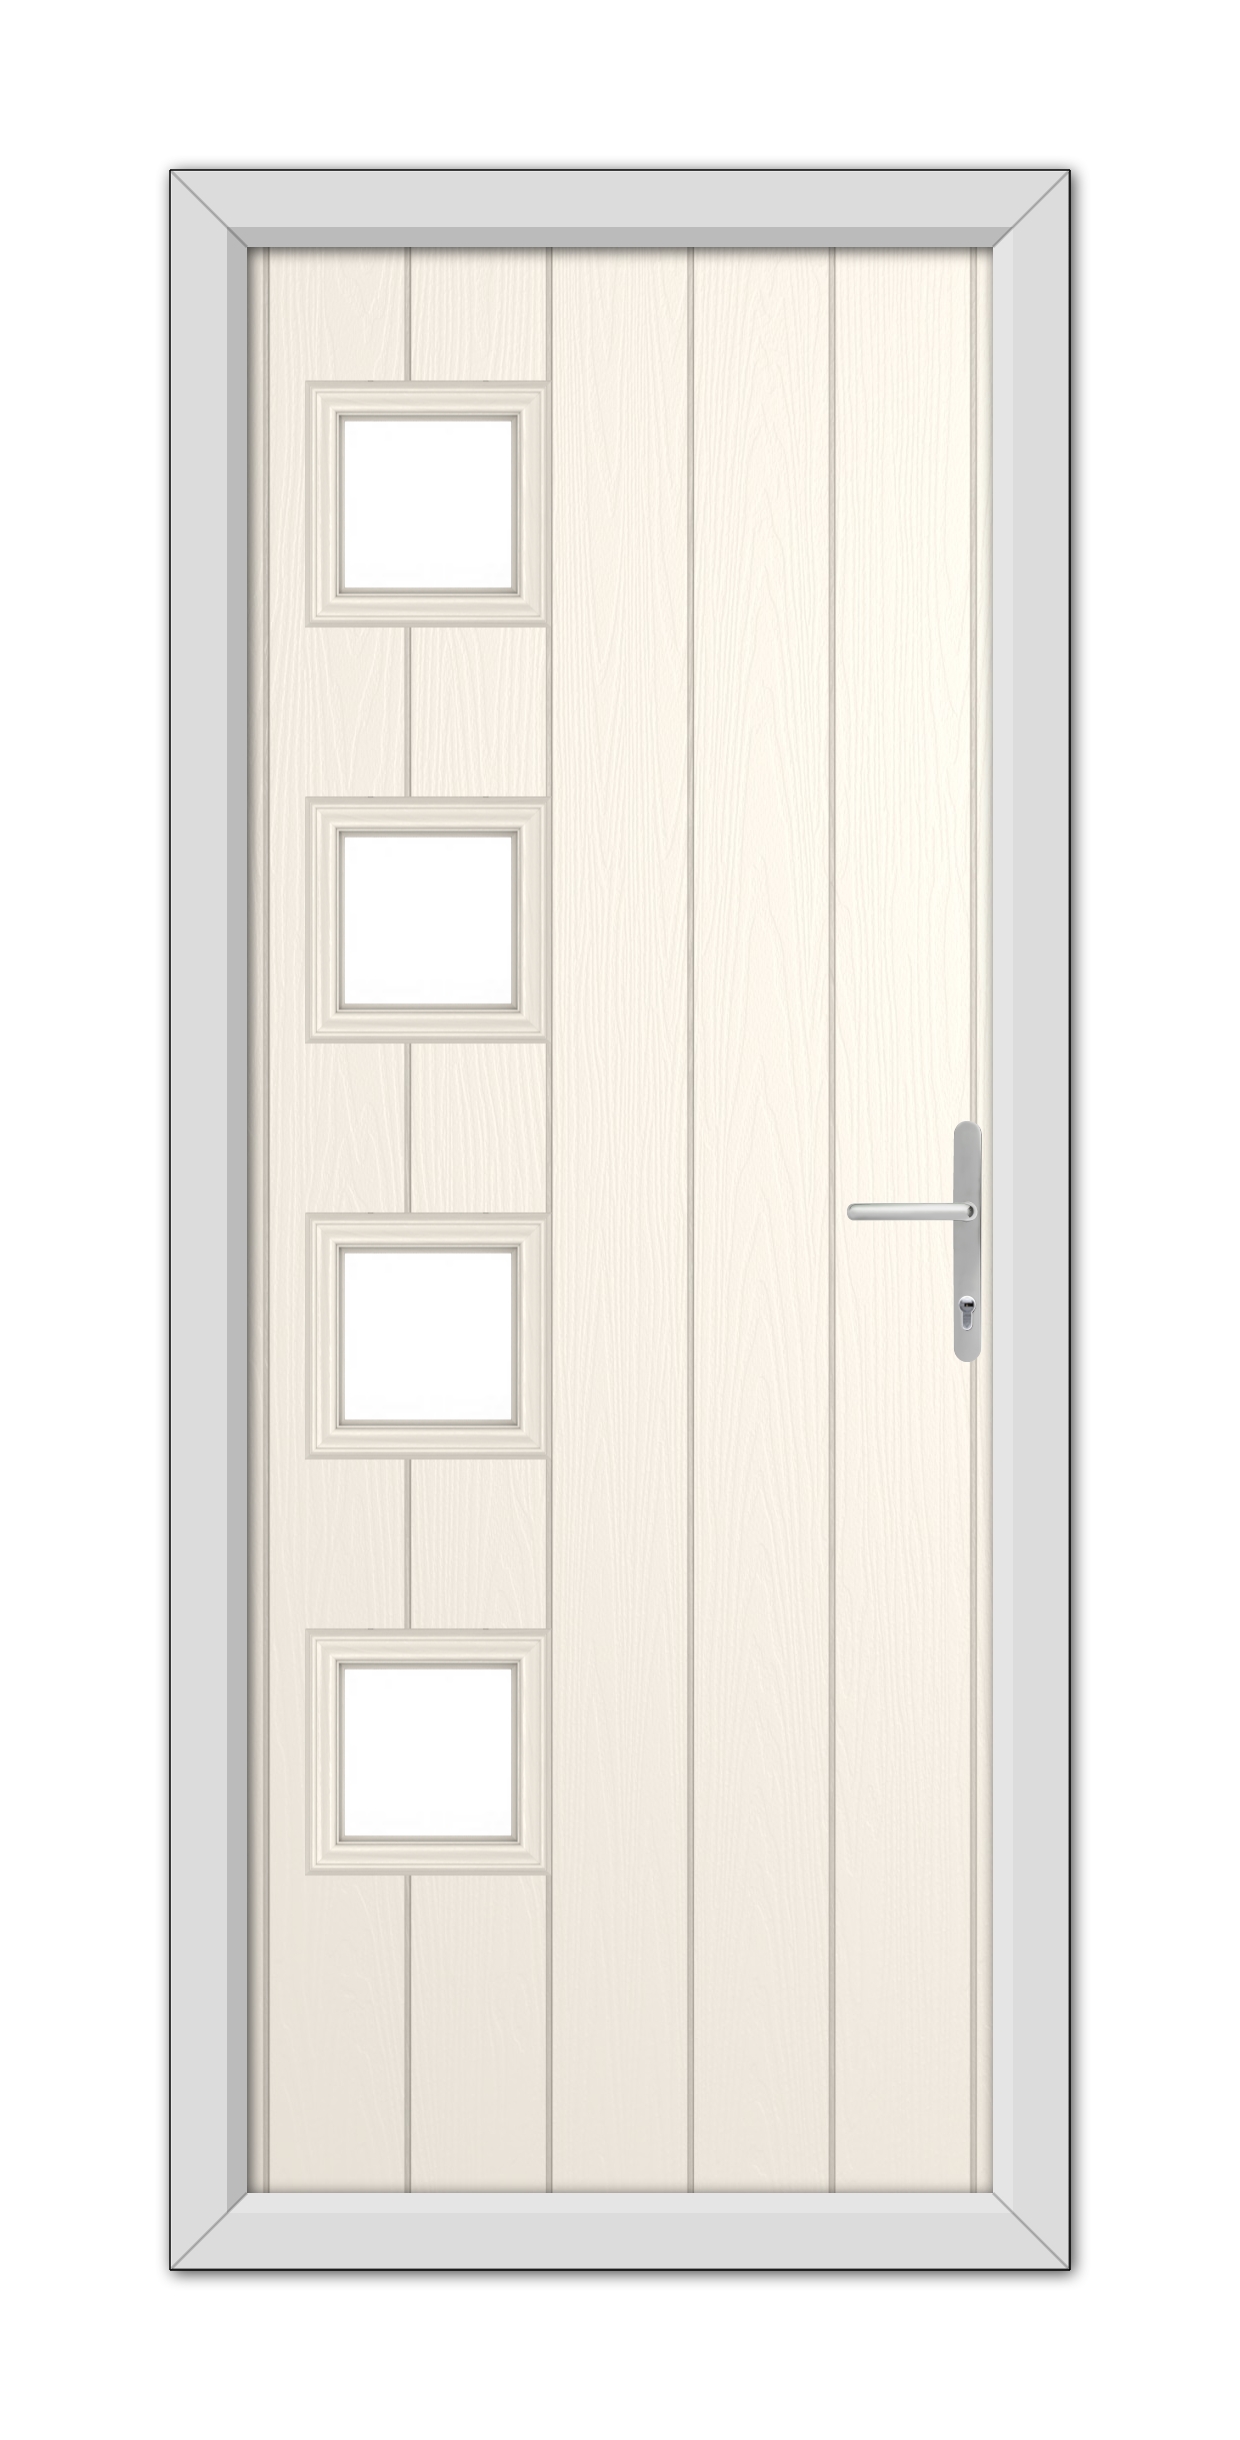 A modern White Foil Sussex Composite Door with a 48mm Timber Core, four rectangular glass panels and a silver handle, set within a grey frame.